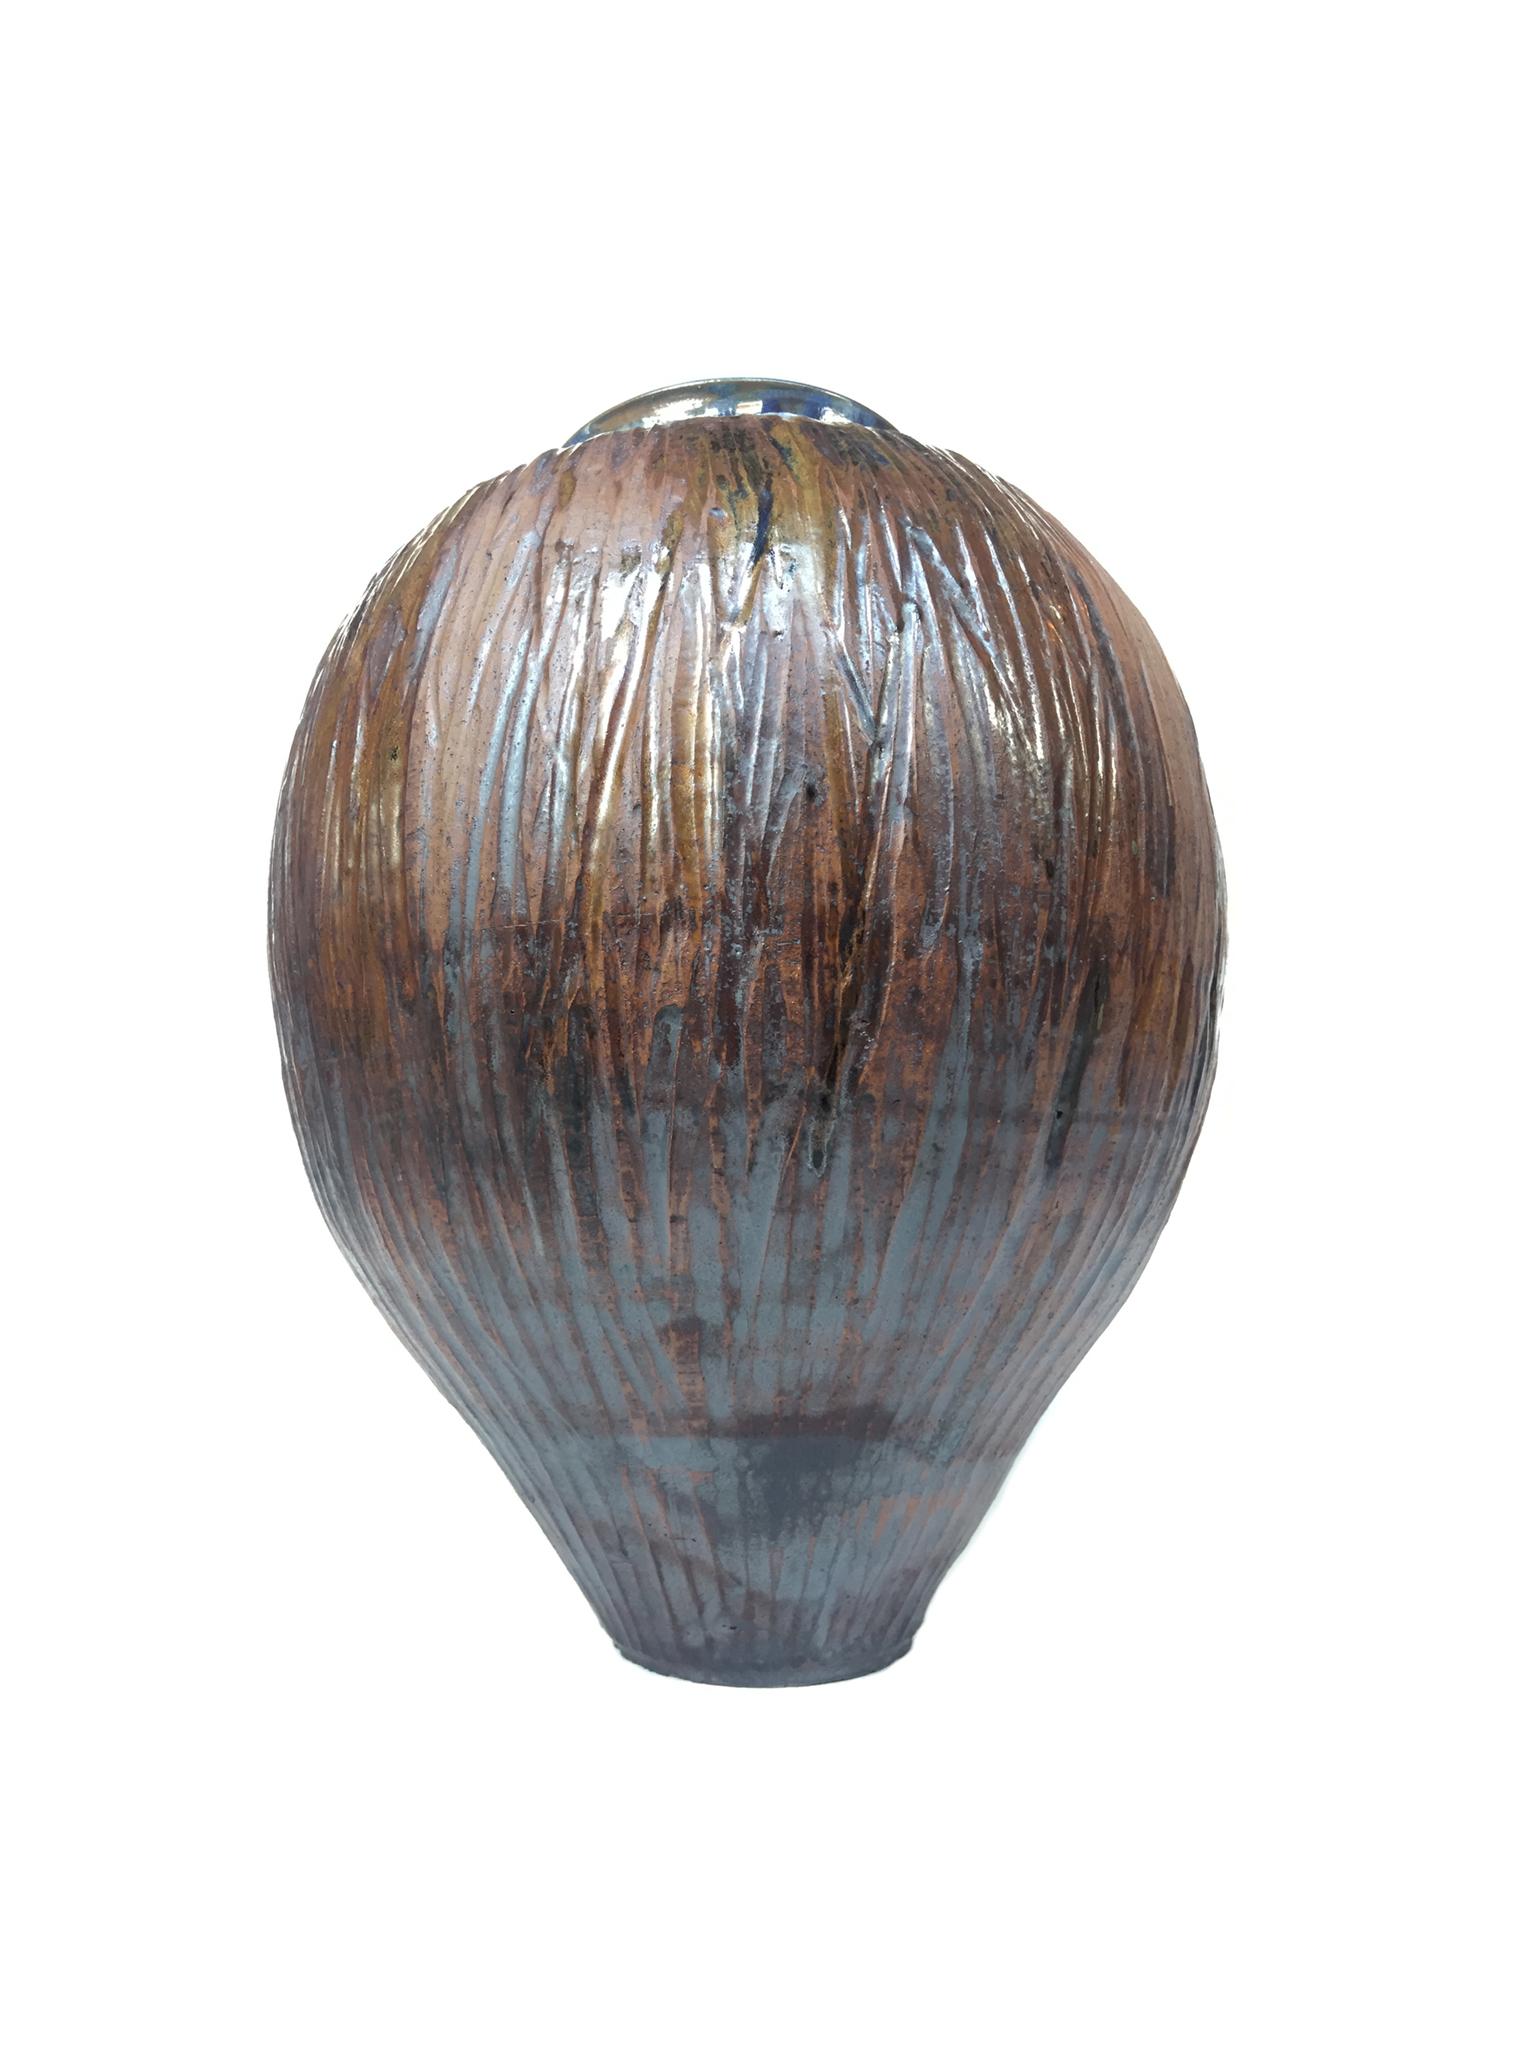 A richly textured ceramic urn from Thom Lussier's 'Fairy' pottery. The artist applies a mixture of different glazing techniques to create various effects in hue and surface. The vase's external surface is reminiscent of wood bark with deep ridges